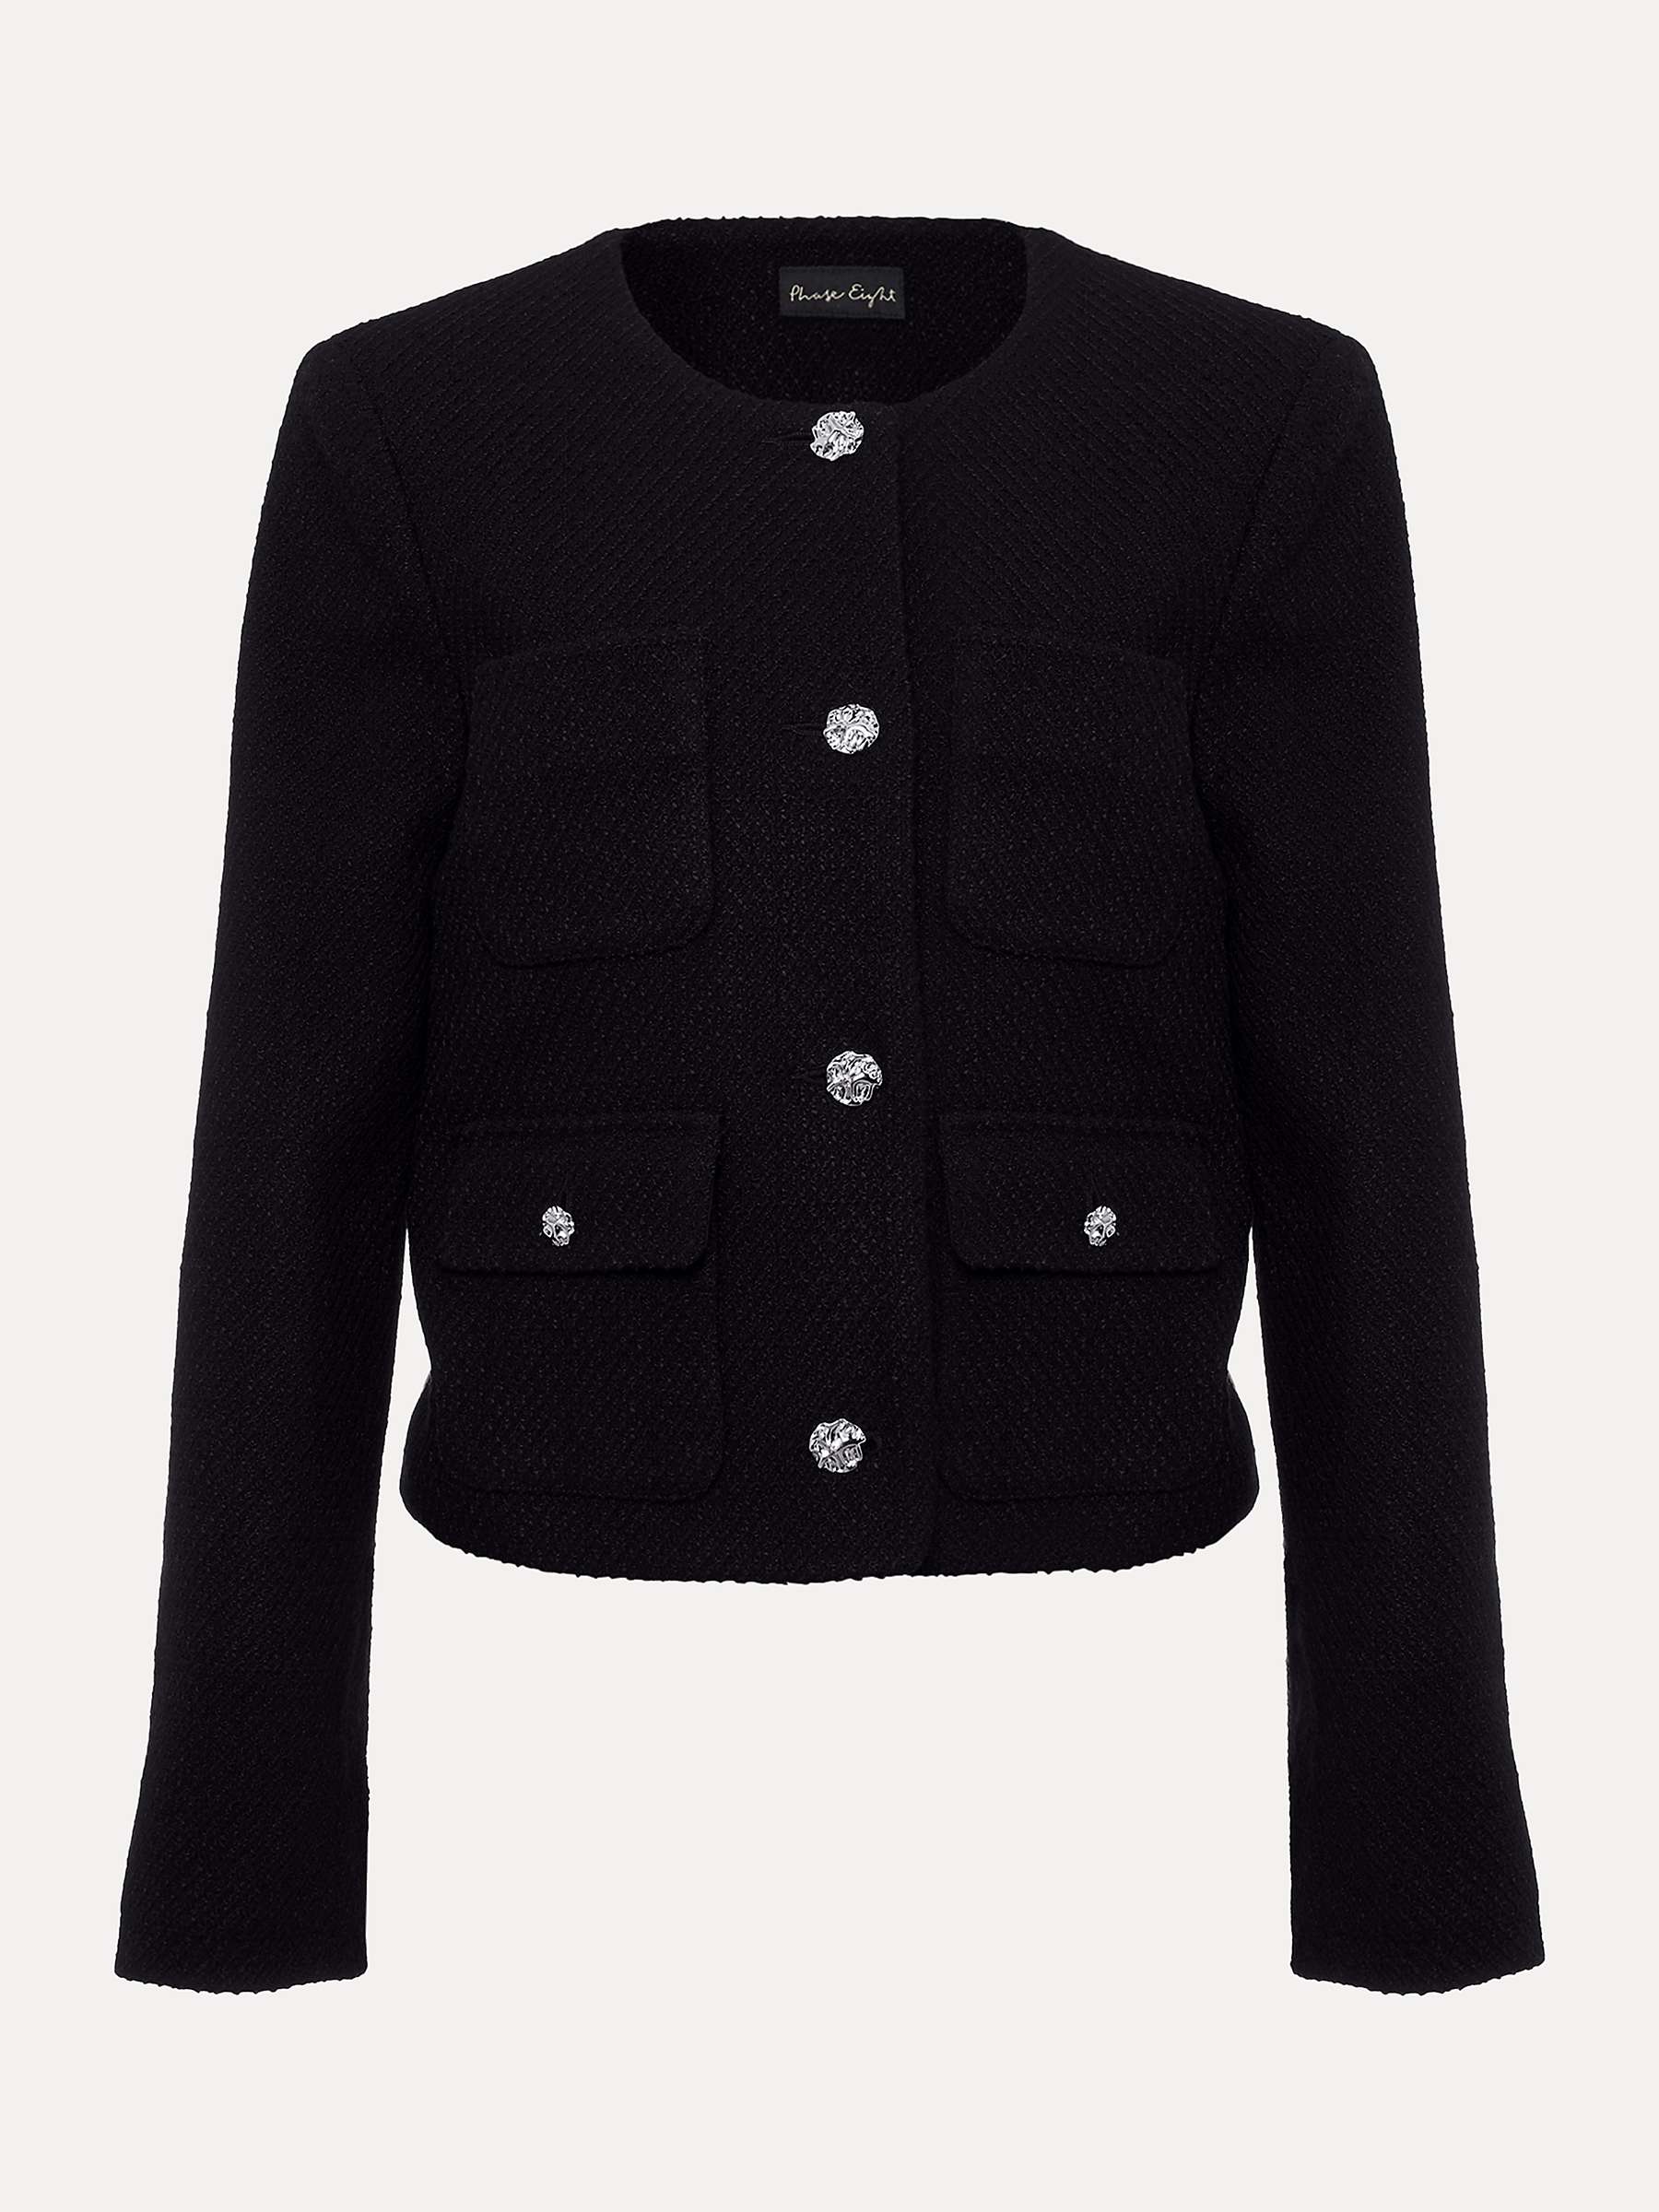 Buy Phase Eight Libby Knitted Jacket, Navy Online at johnlewis.com